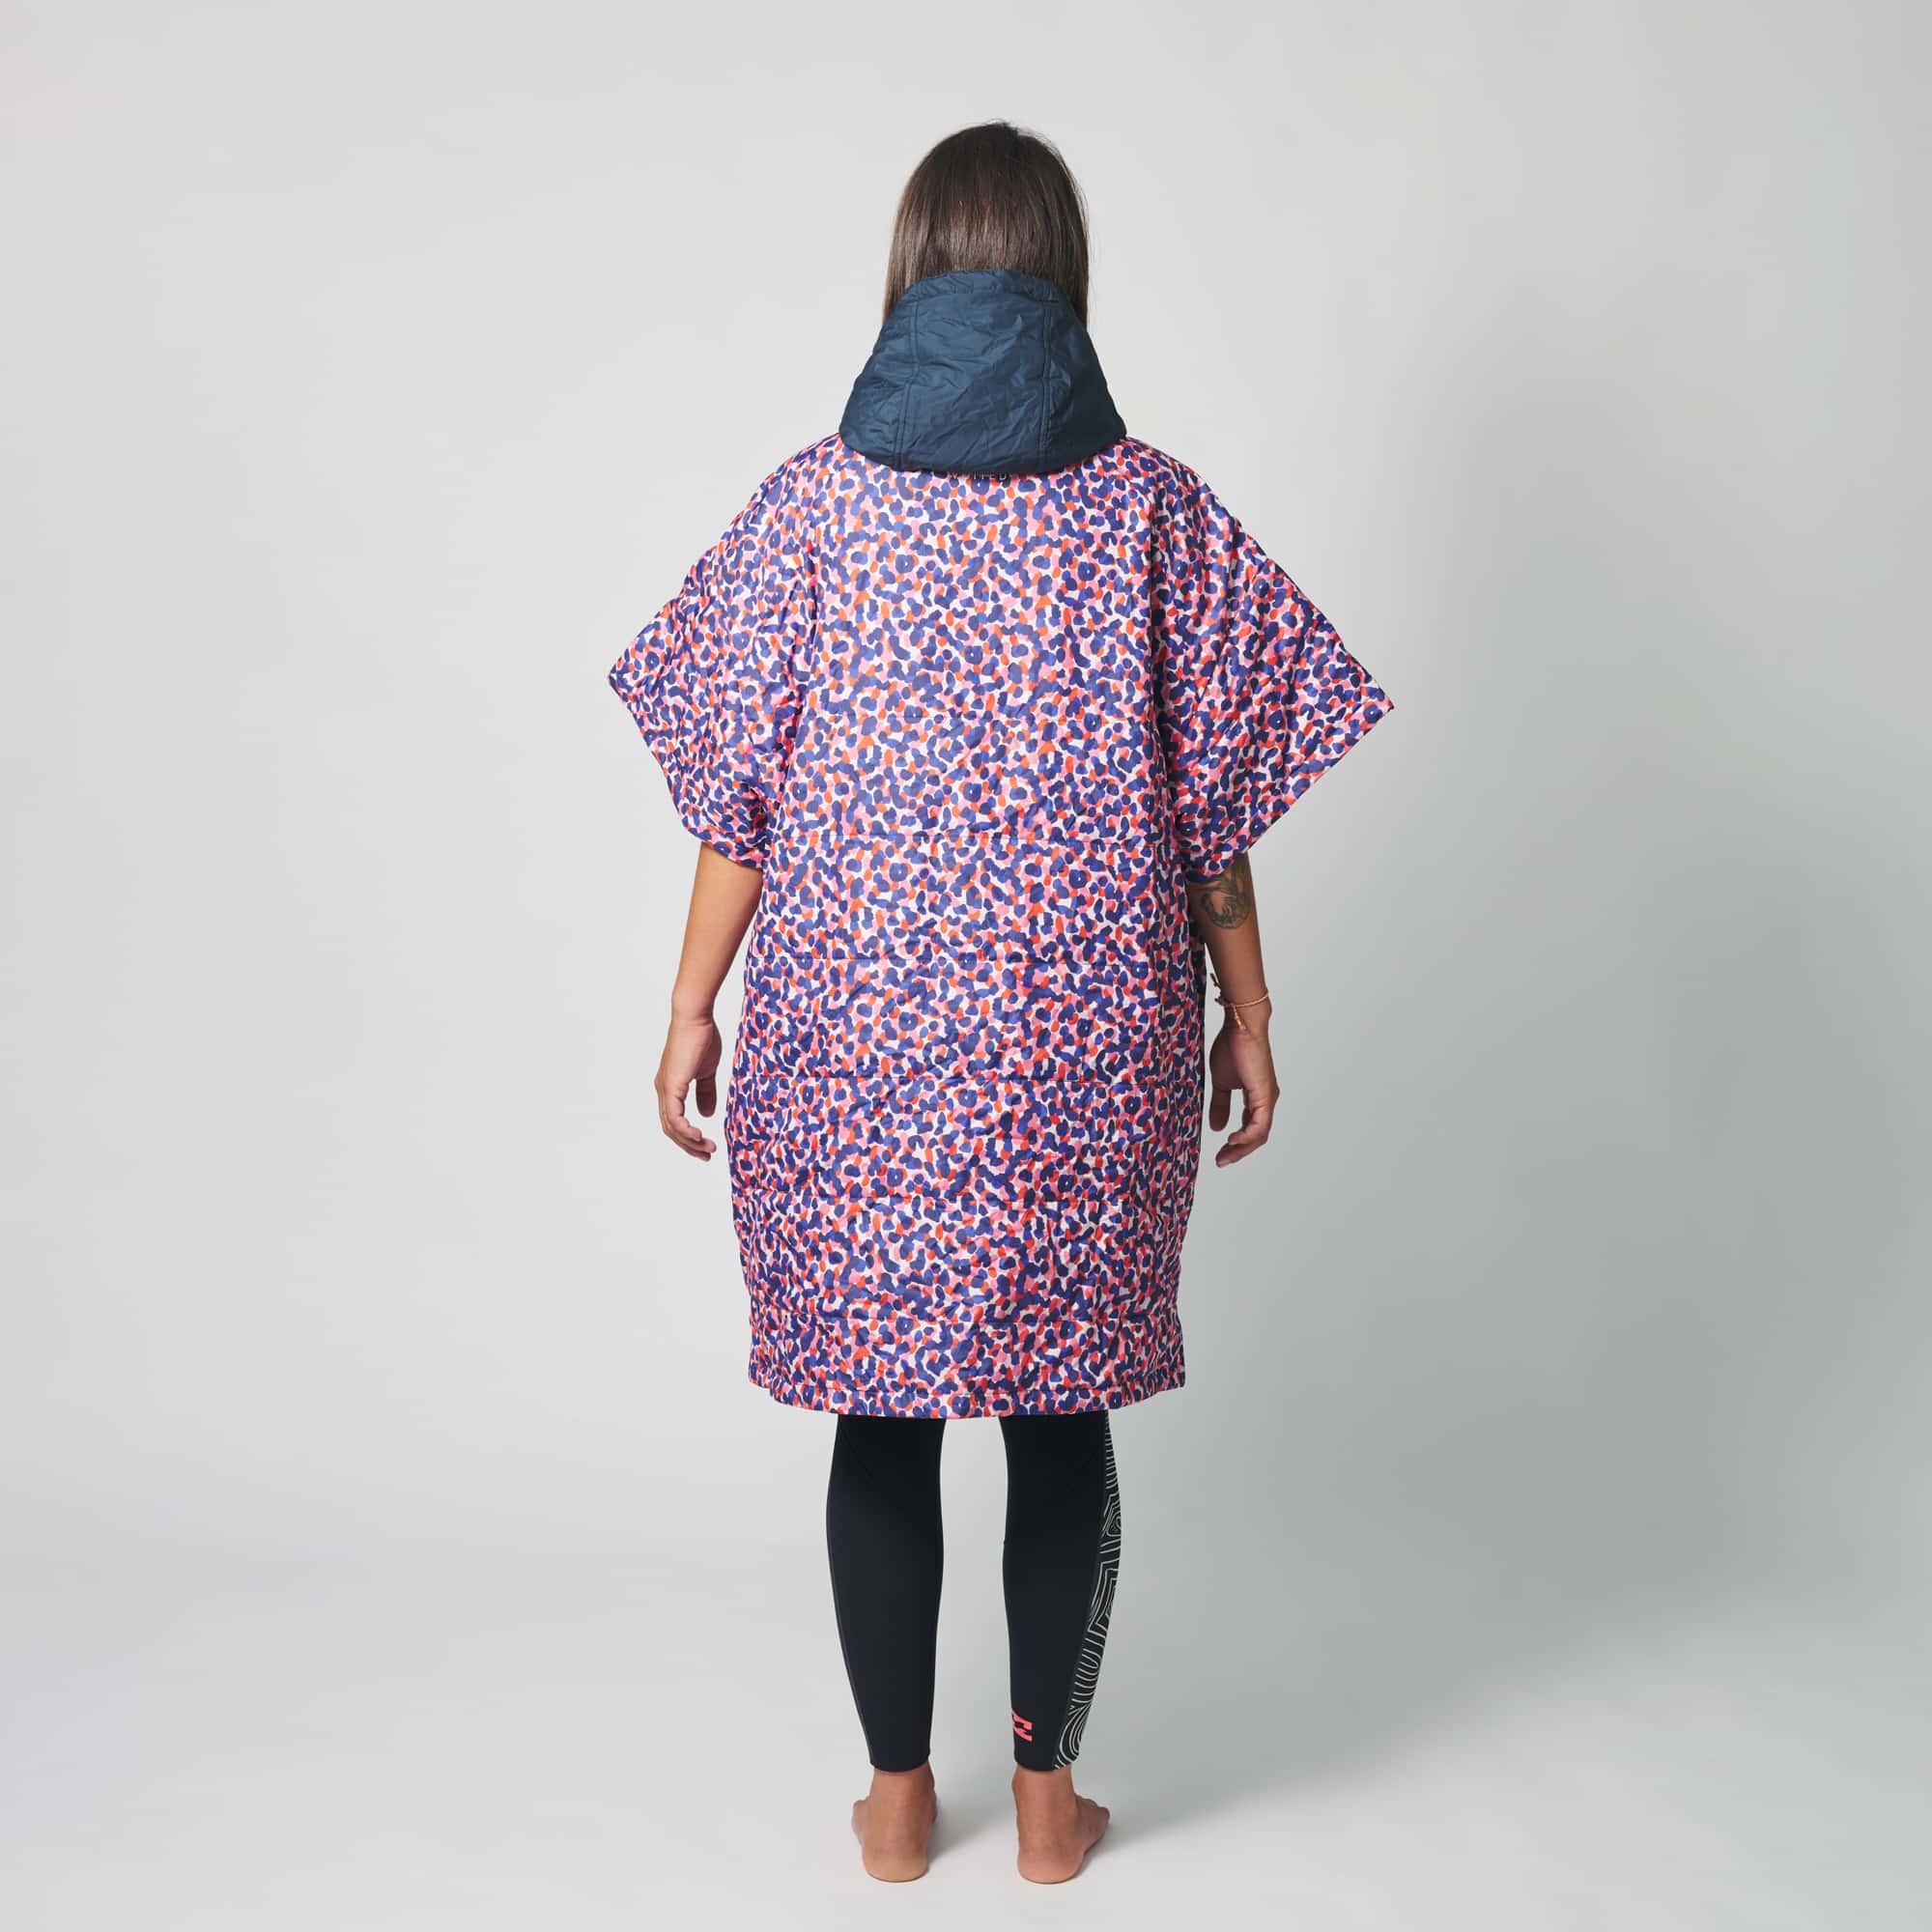 VOITED 2nd Edition Outdoor Poncho for Surfing, Camping, Vanlife & Wild Swimming - Confetti